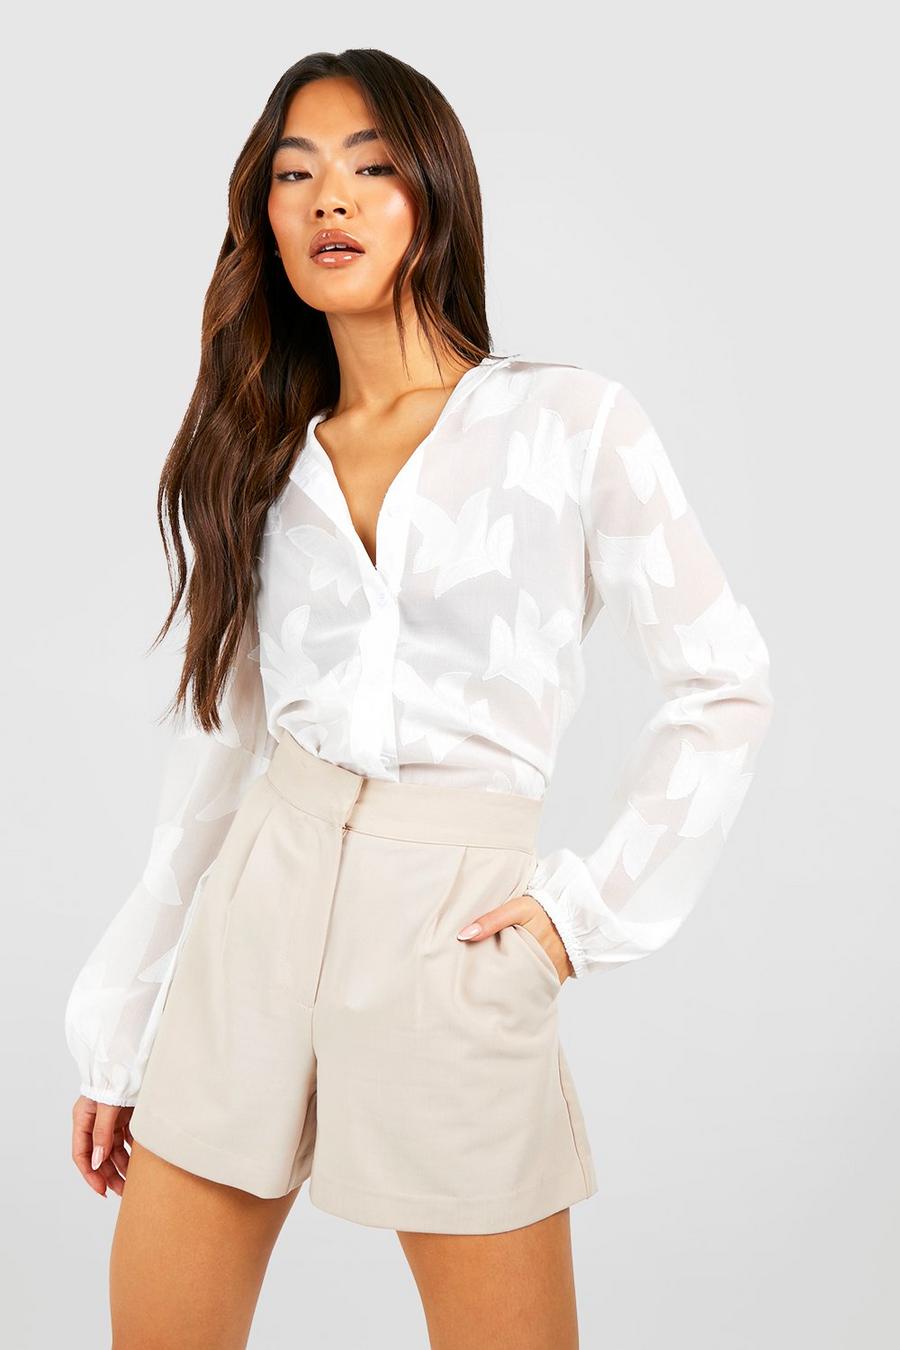 Ivory white Sheer Floral Puff Sleeve Shirt